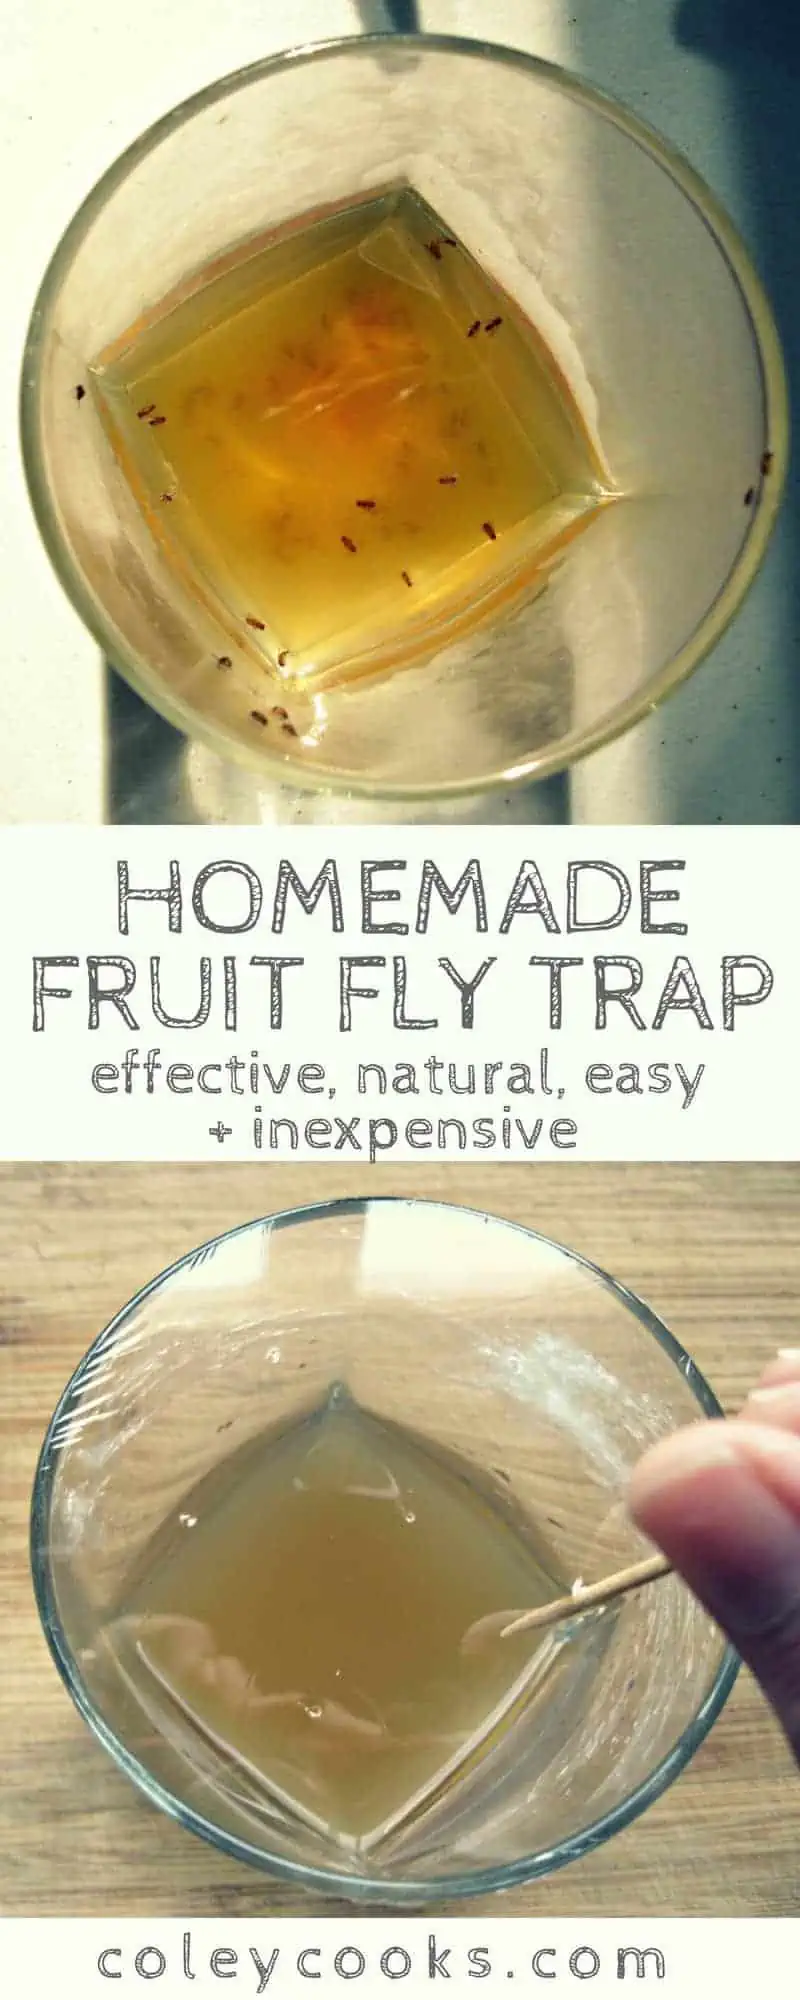 https://coleycooks.com/wp-content/uploads/2014/08/HOMEMADE-FRUIT-FLY-TRAP-All-natural-fruit-fly-trap-made-using-common-kitchen-ingredients.-Effective-easy-and-inexpensive-.-easy-fruitflies-allnatural-DIY-ColeyCooks.com_.webp